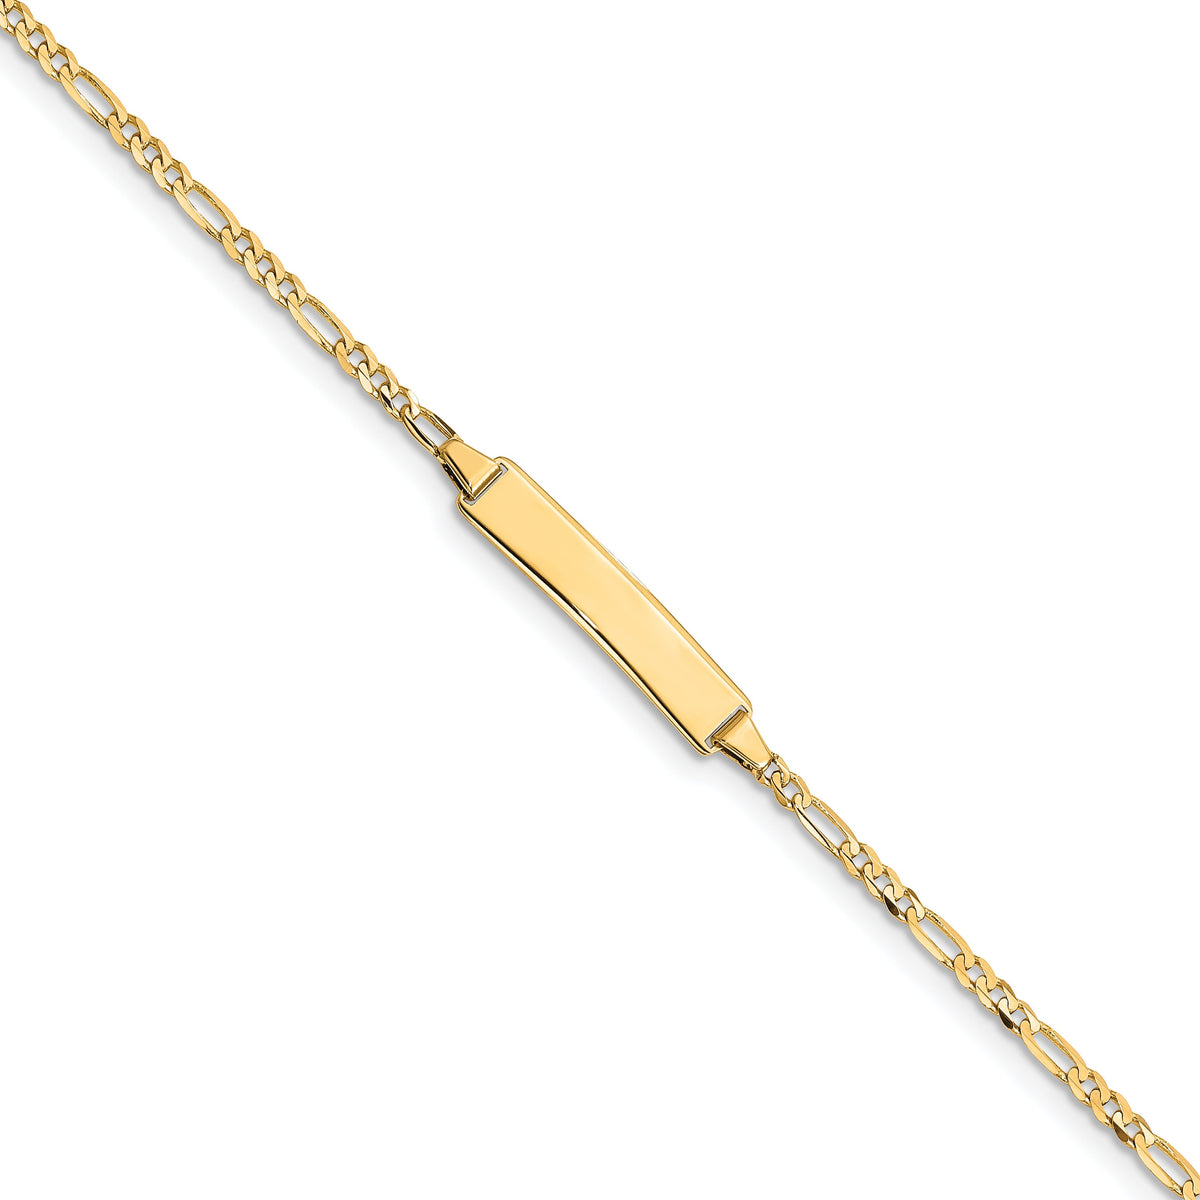 Children's Solid 14k Yellow Gold Personalized ID Figaro Bracelet - 6 inches FREE ENGRAVING ( 6 Characters) 3+ Years Old